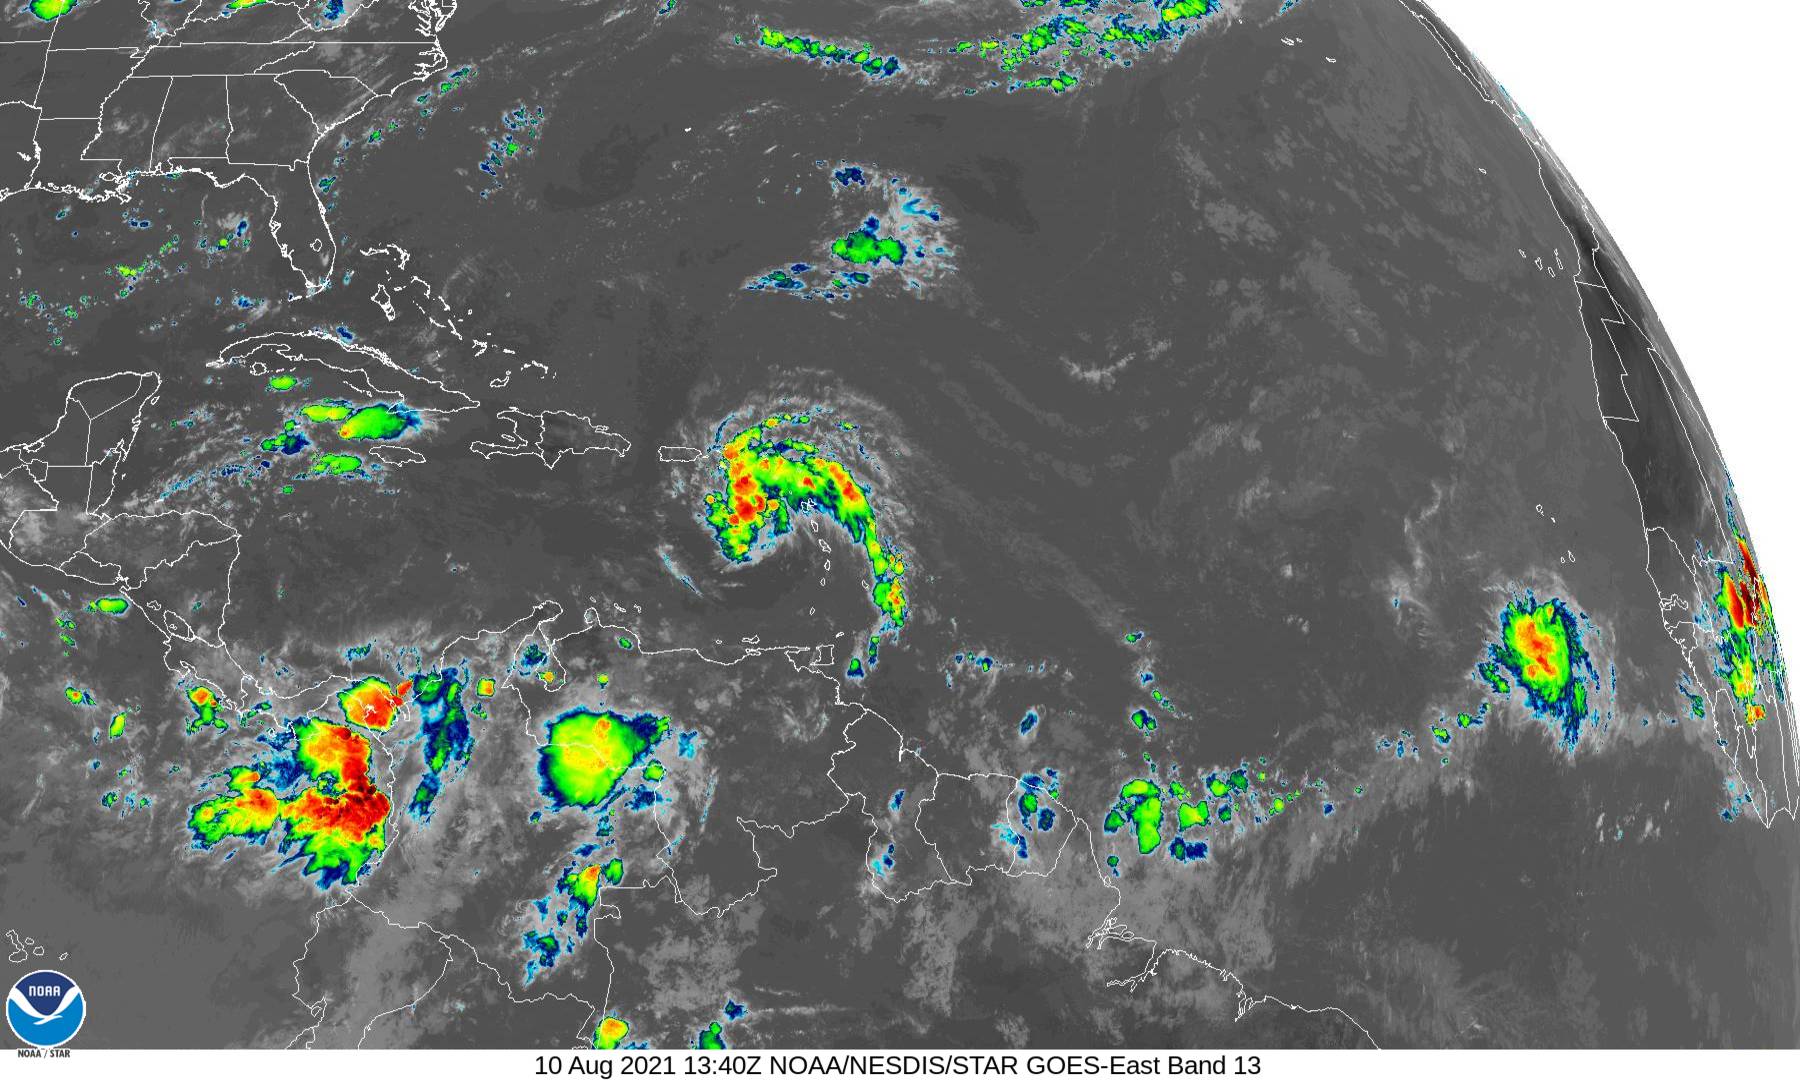 Forecasters keeping a close eye on the tropics as storm begins to intensify